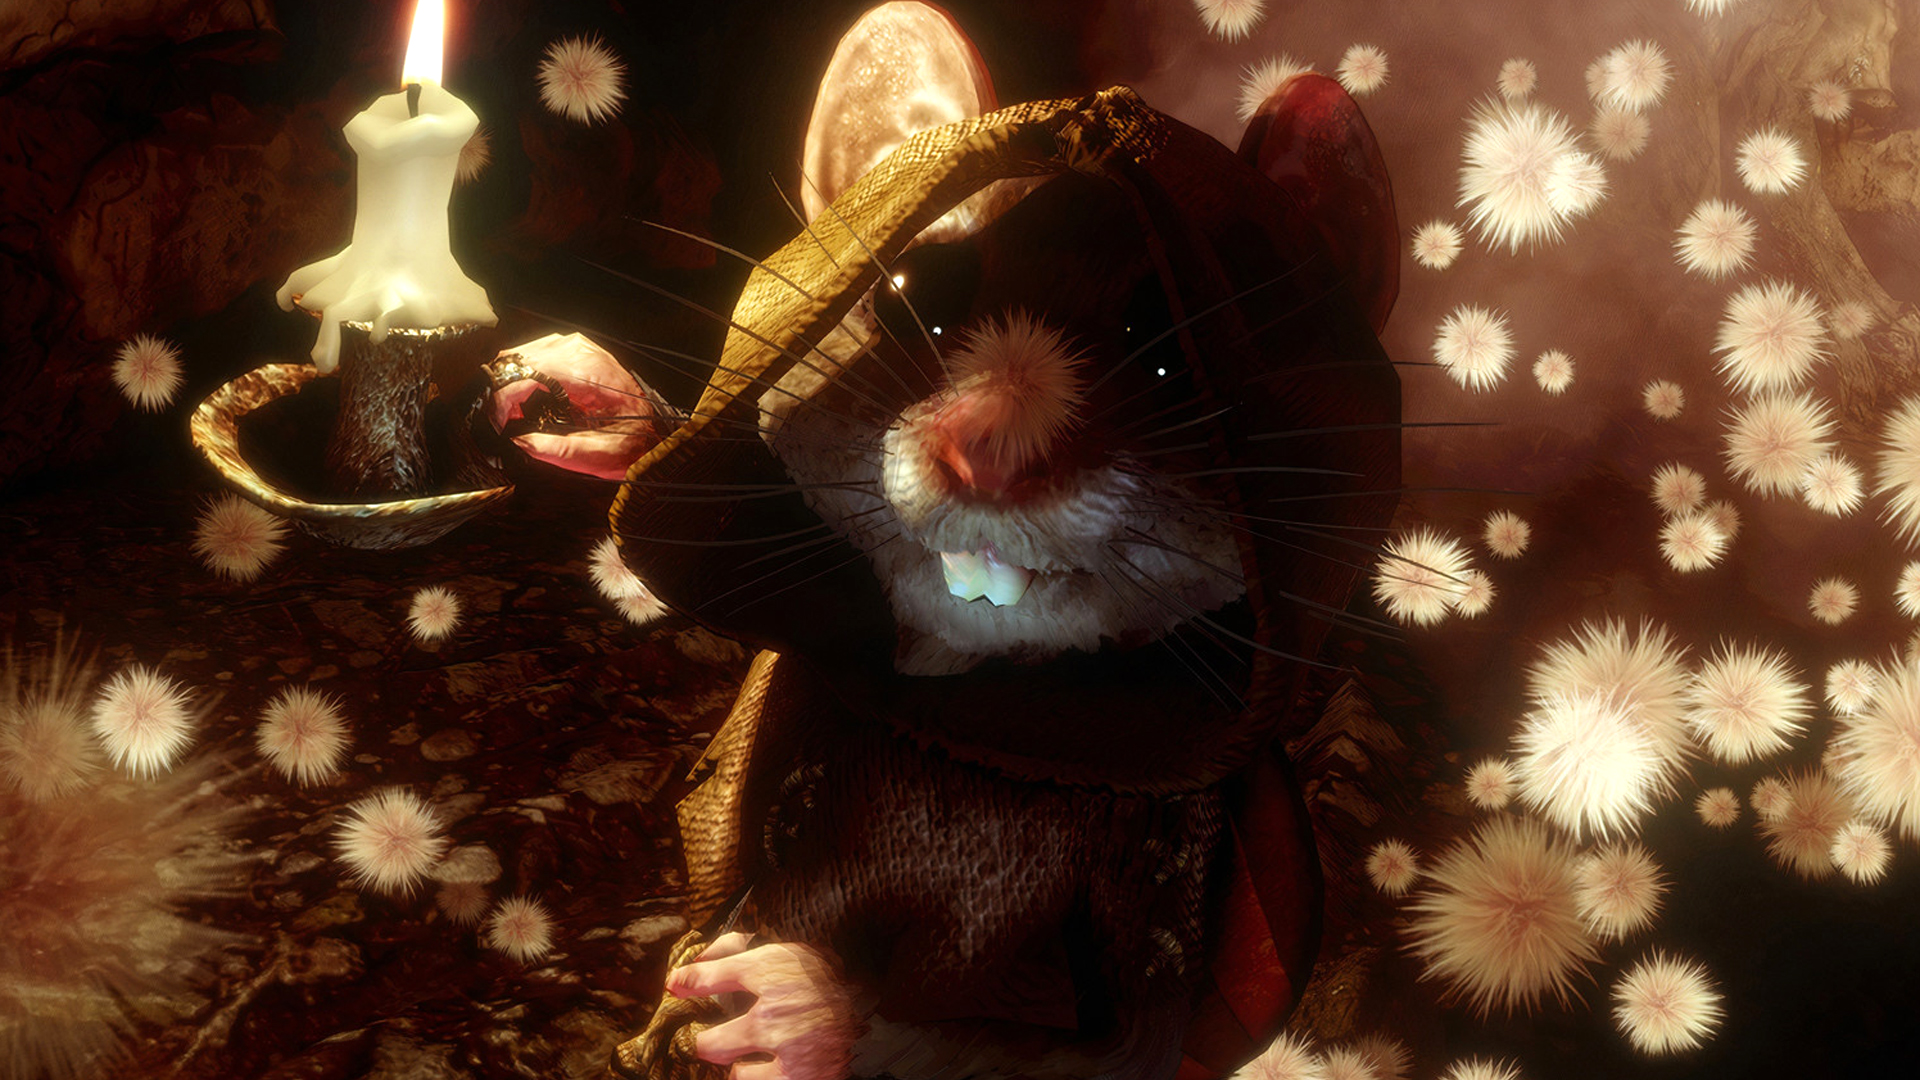 Mouse RPG Ghost of a Tale may be getting a sequel